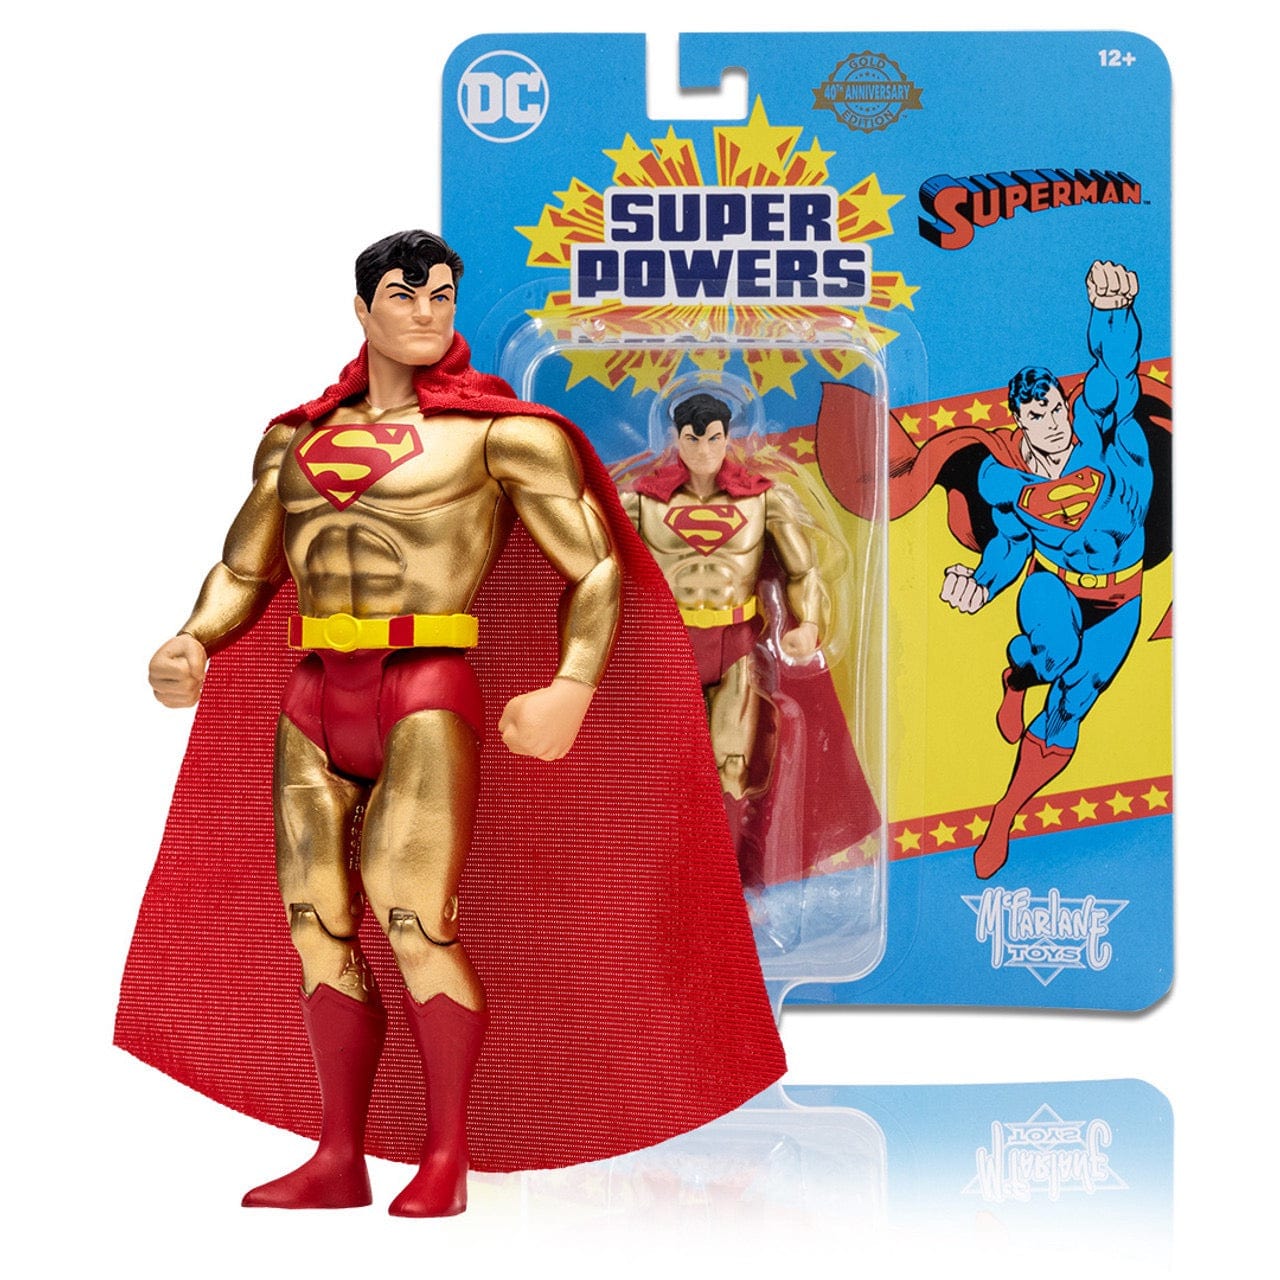 McFarlane Toys DC Super Powers Superman Gold Edition 40th Anniversary Action Figure